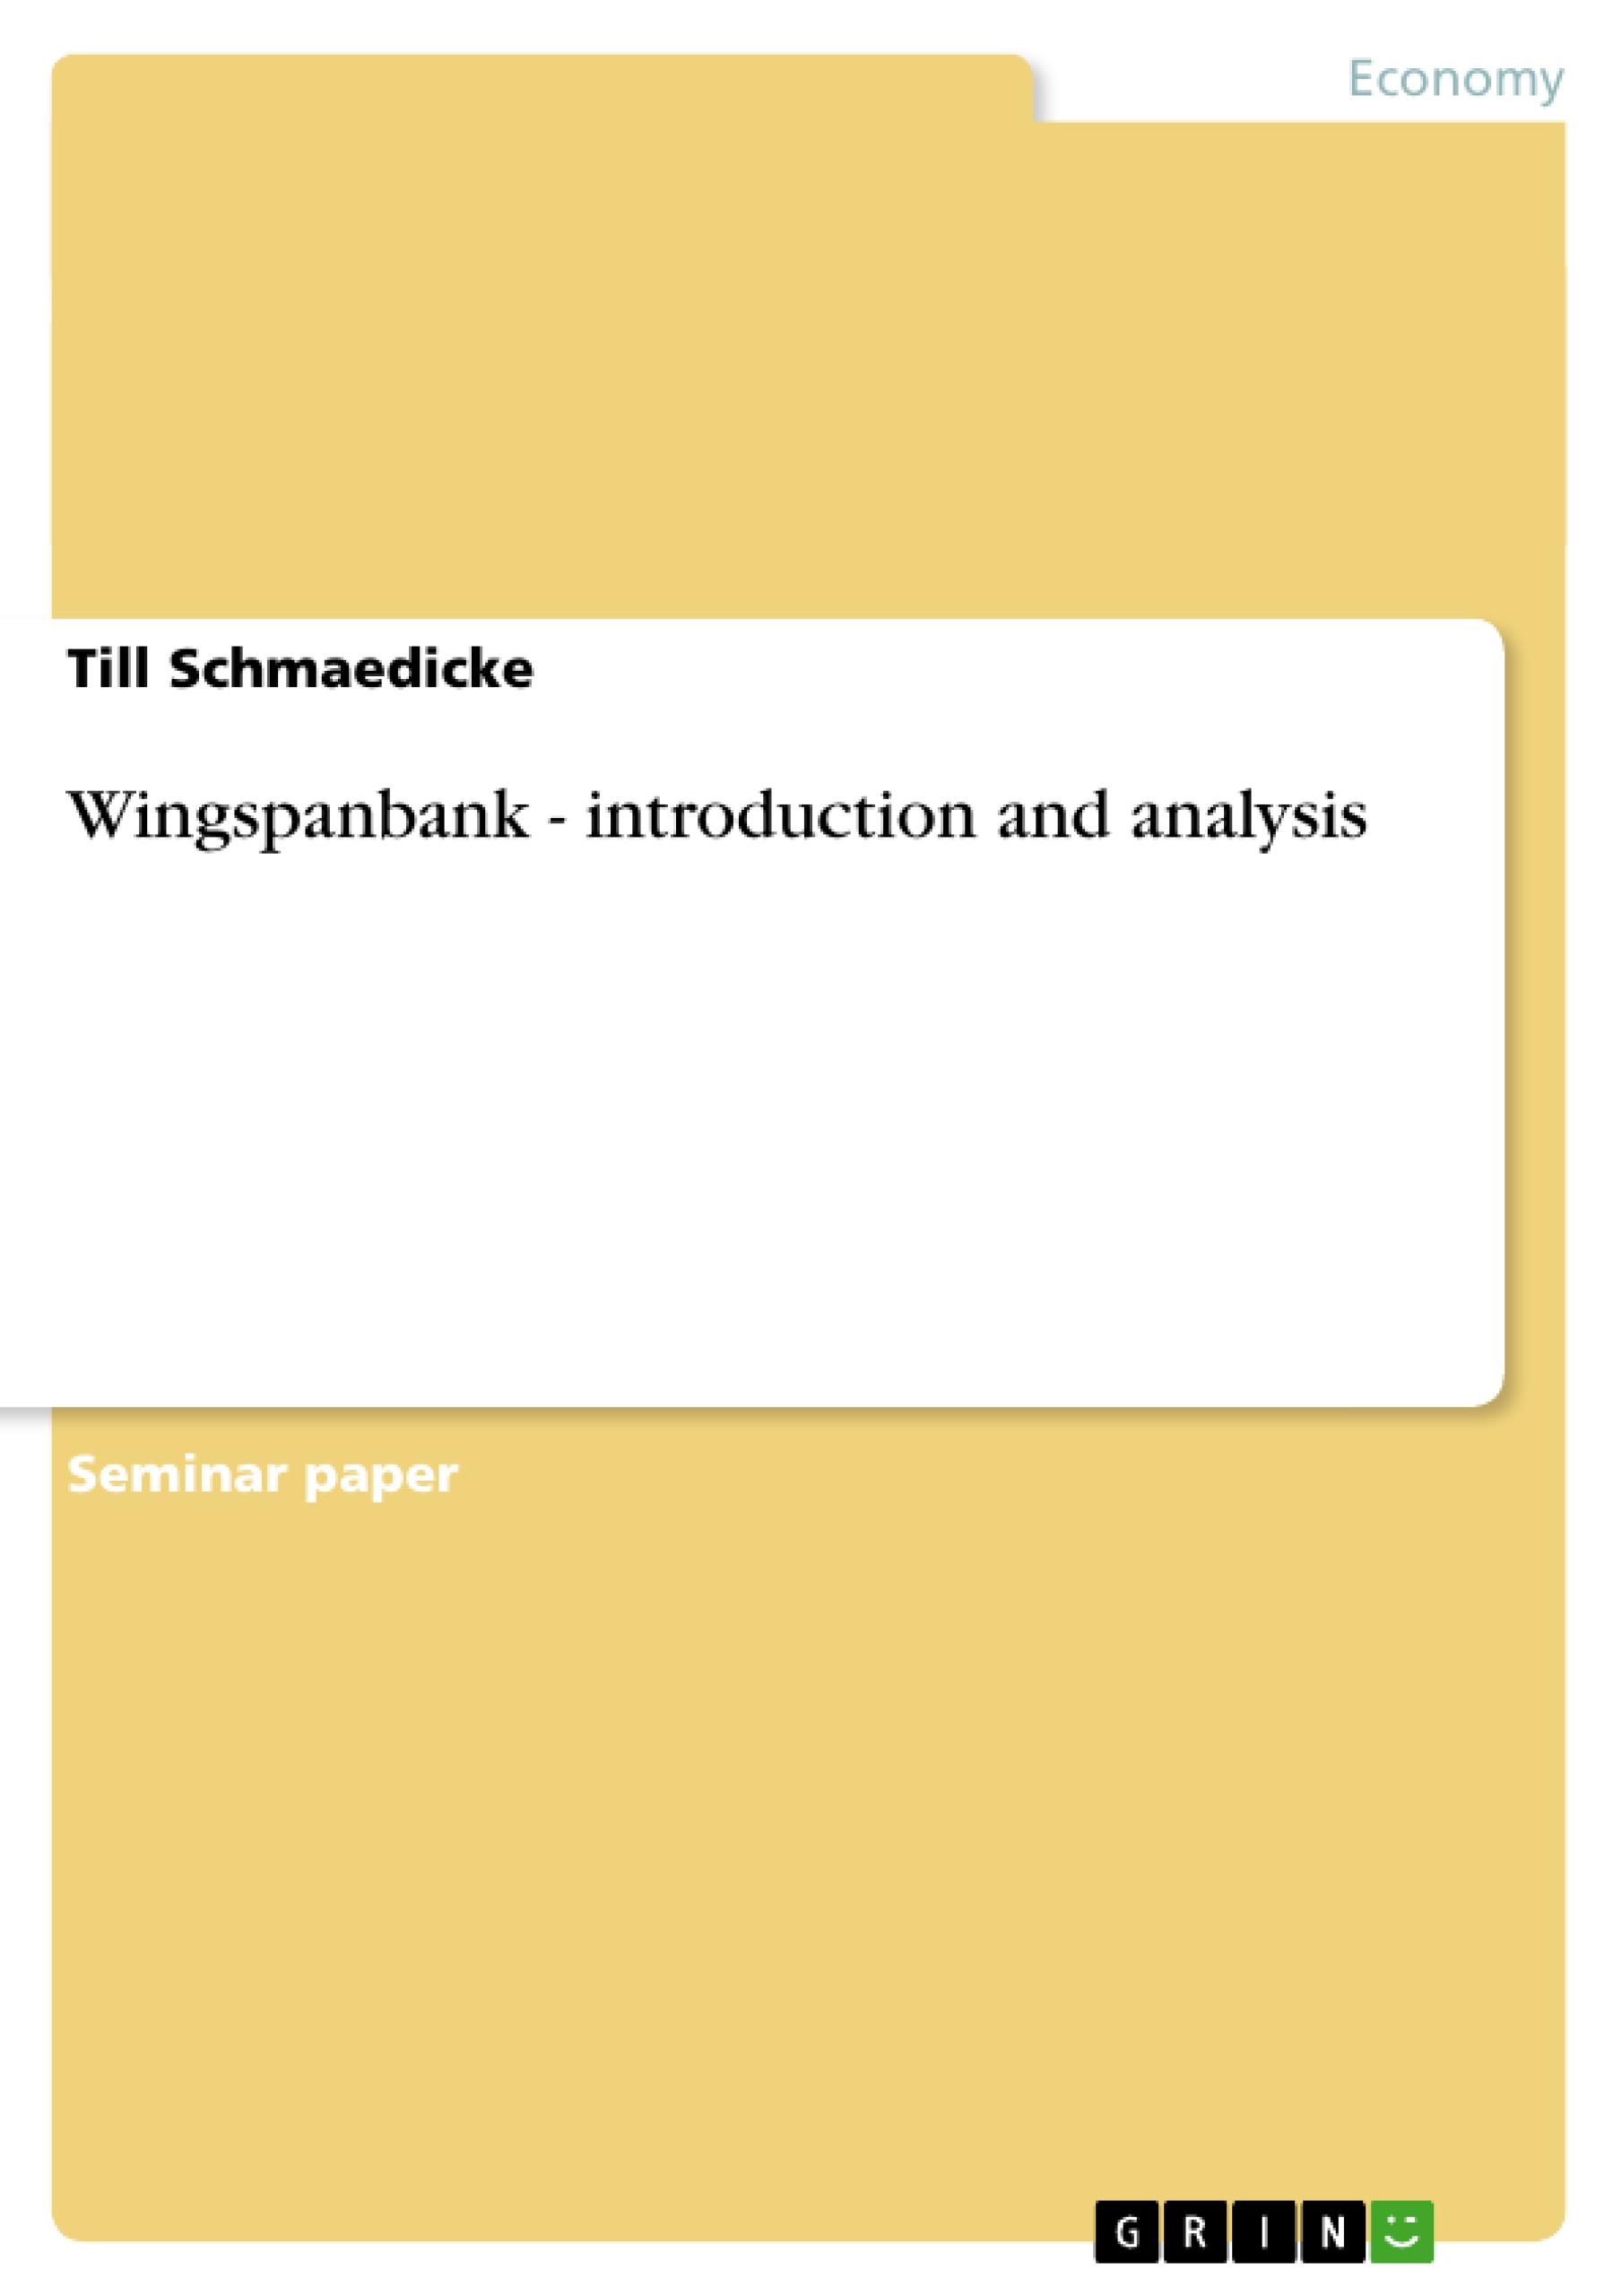 Wingspanbank - introduction and analysis - Schmaedicke, Till